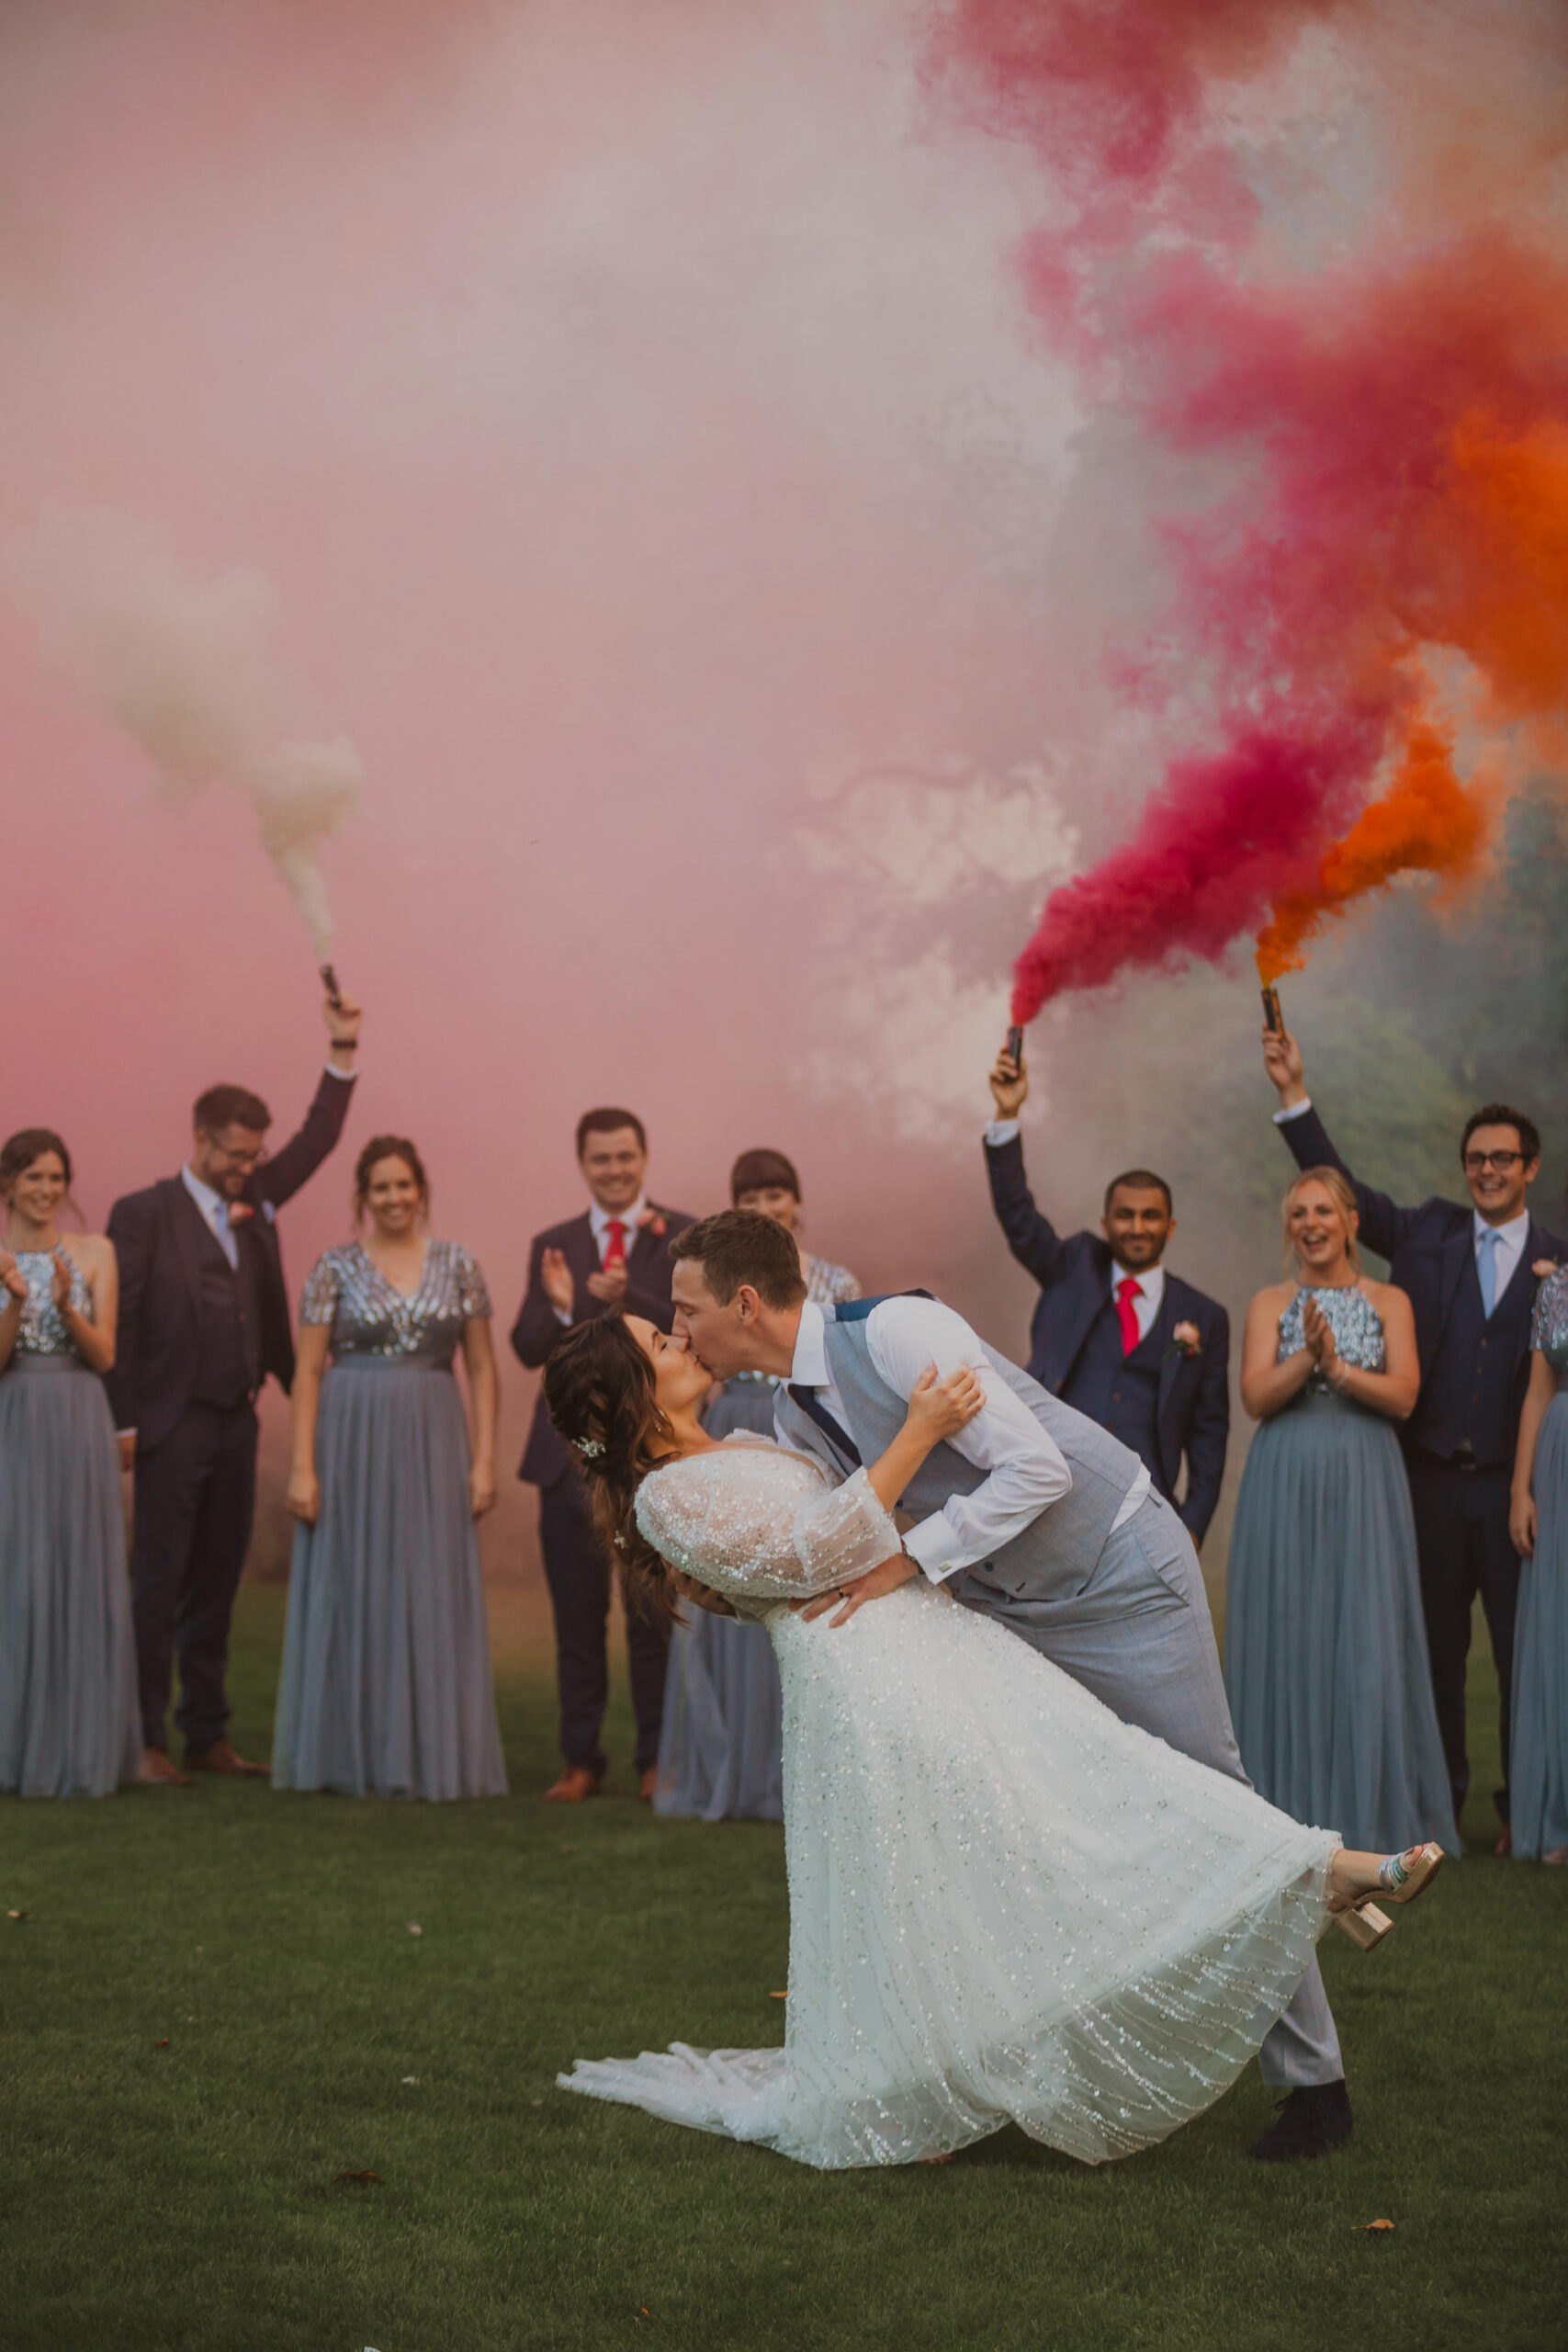 The Wardette Studio - Wedding Photography relaxed, fun + colour